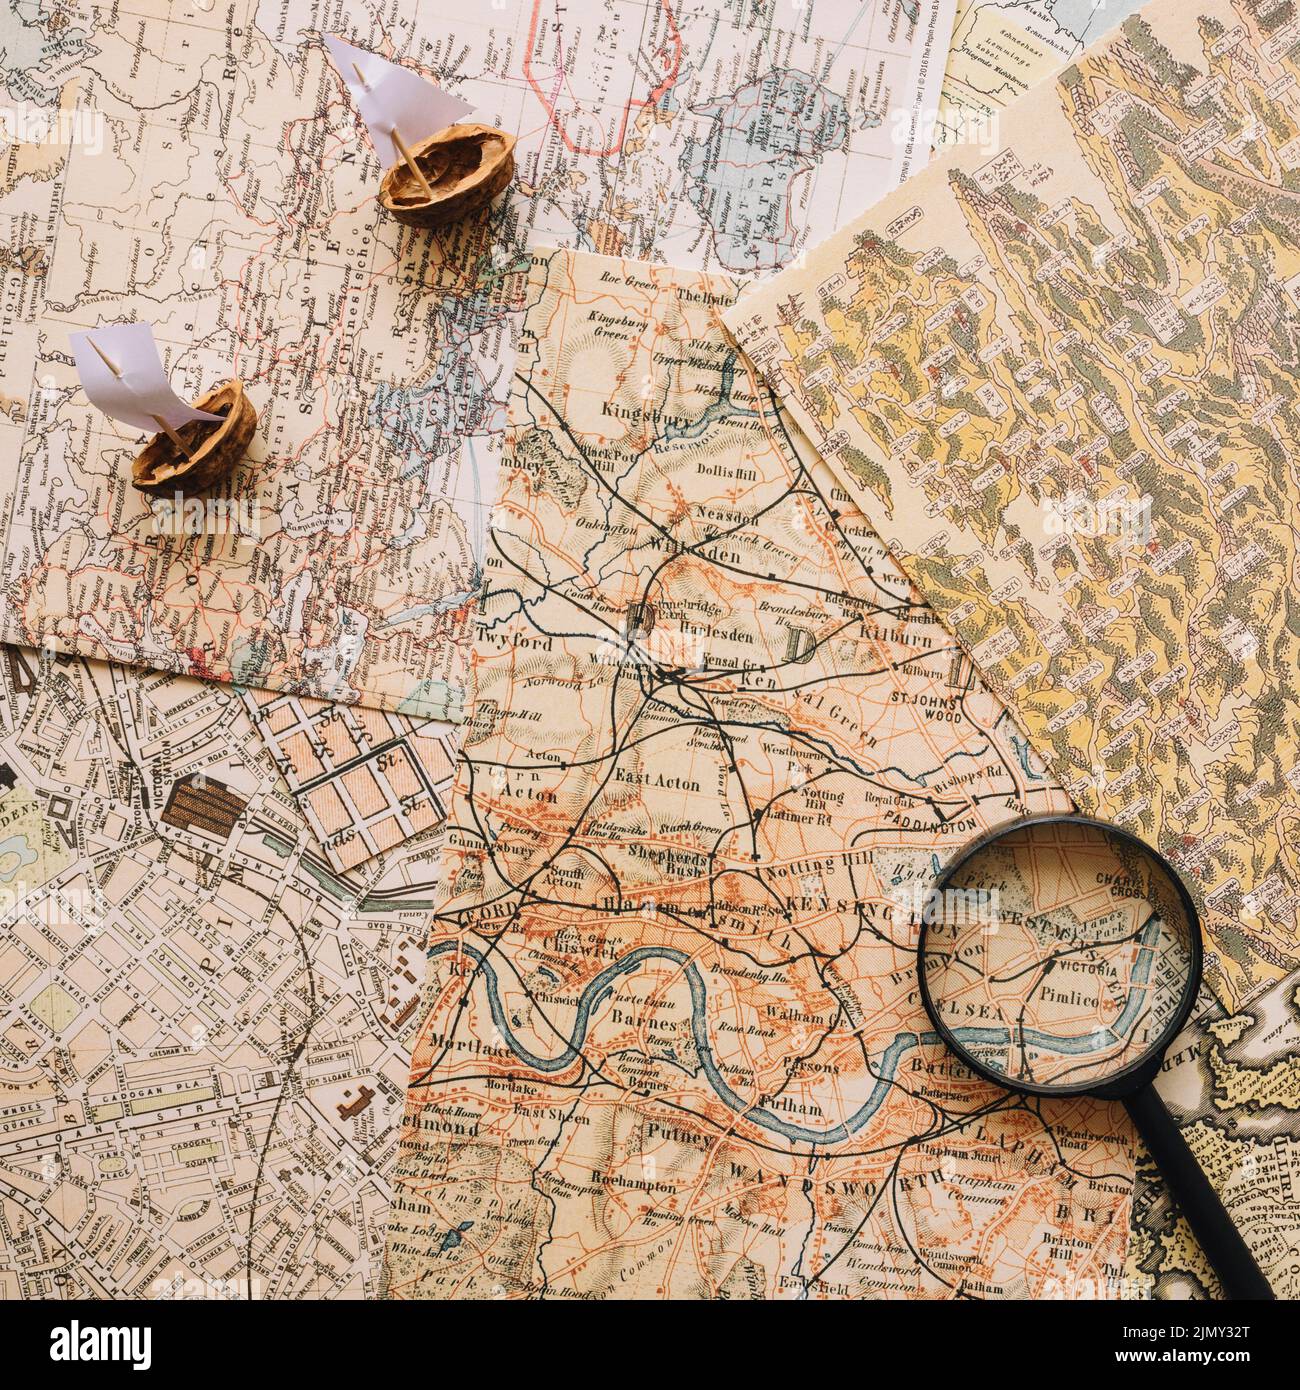 Nutshell boats magnifying glass maps Stock Photo